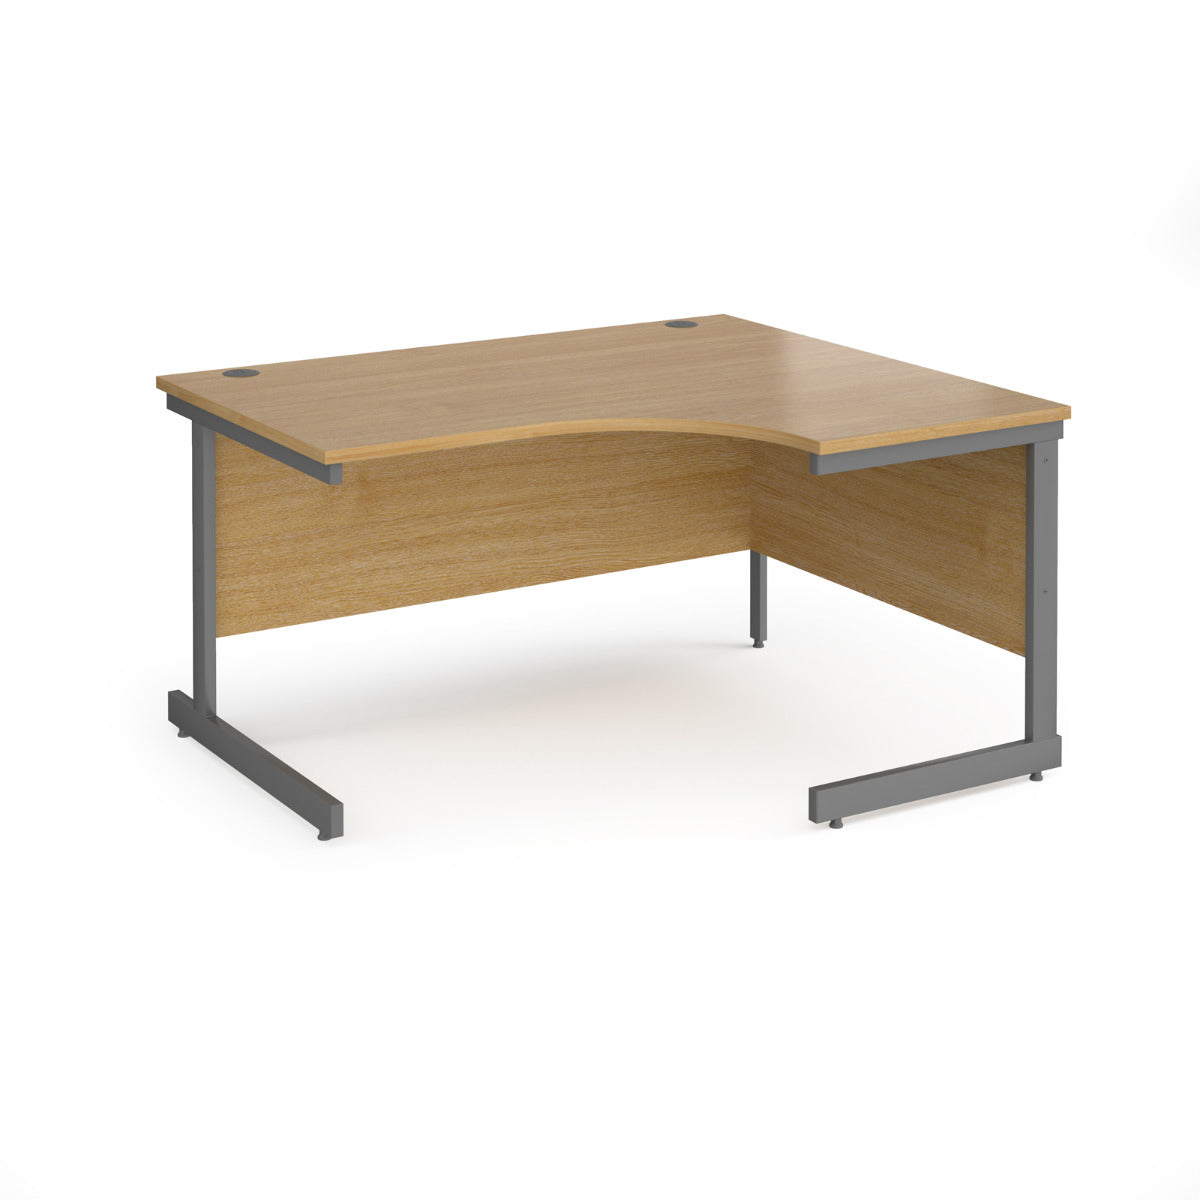 Contract Cantilever Frame Right Hand Corner Office Desk